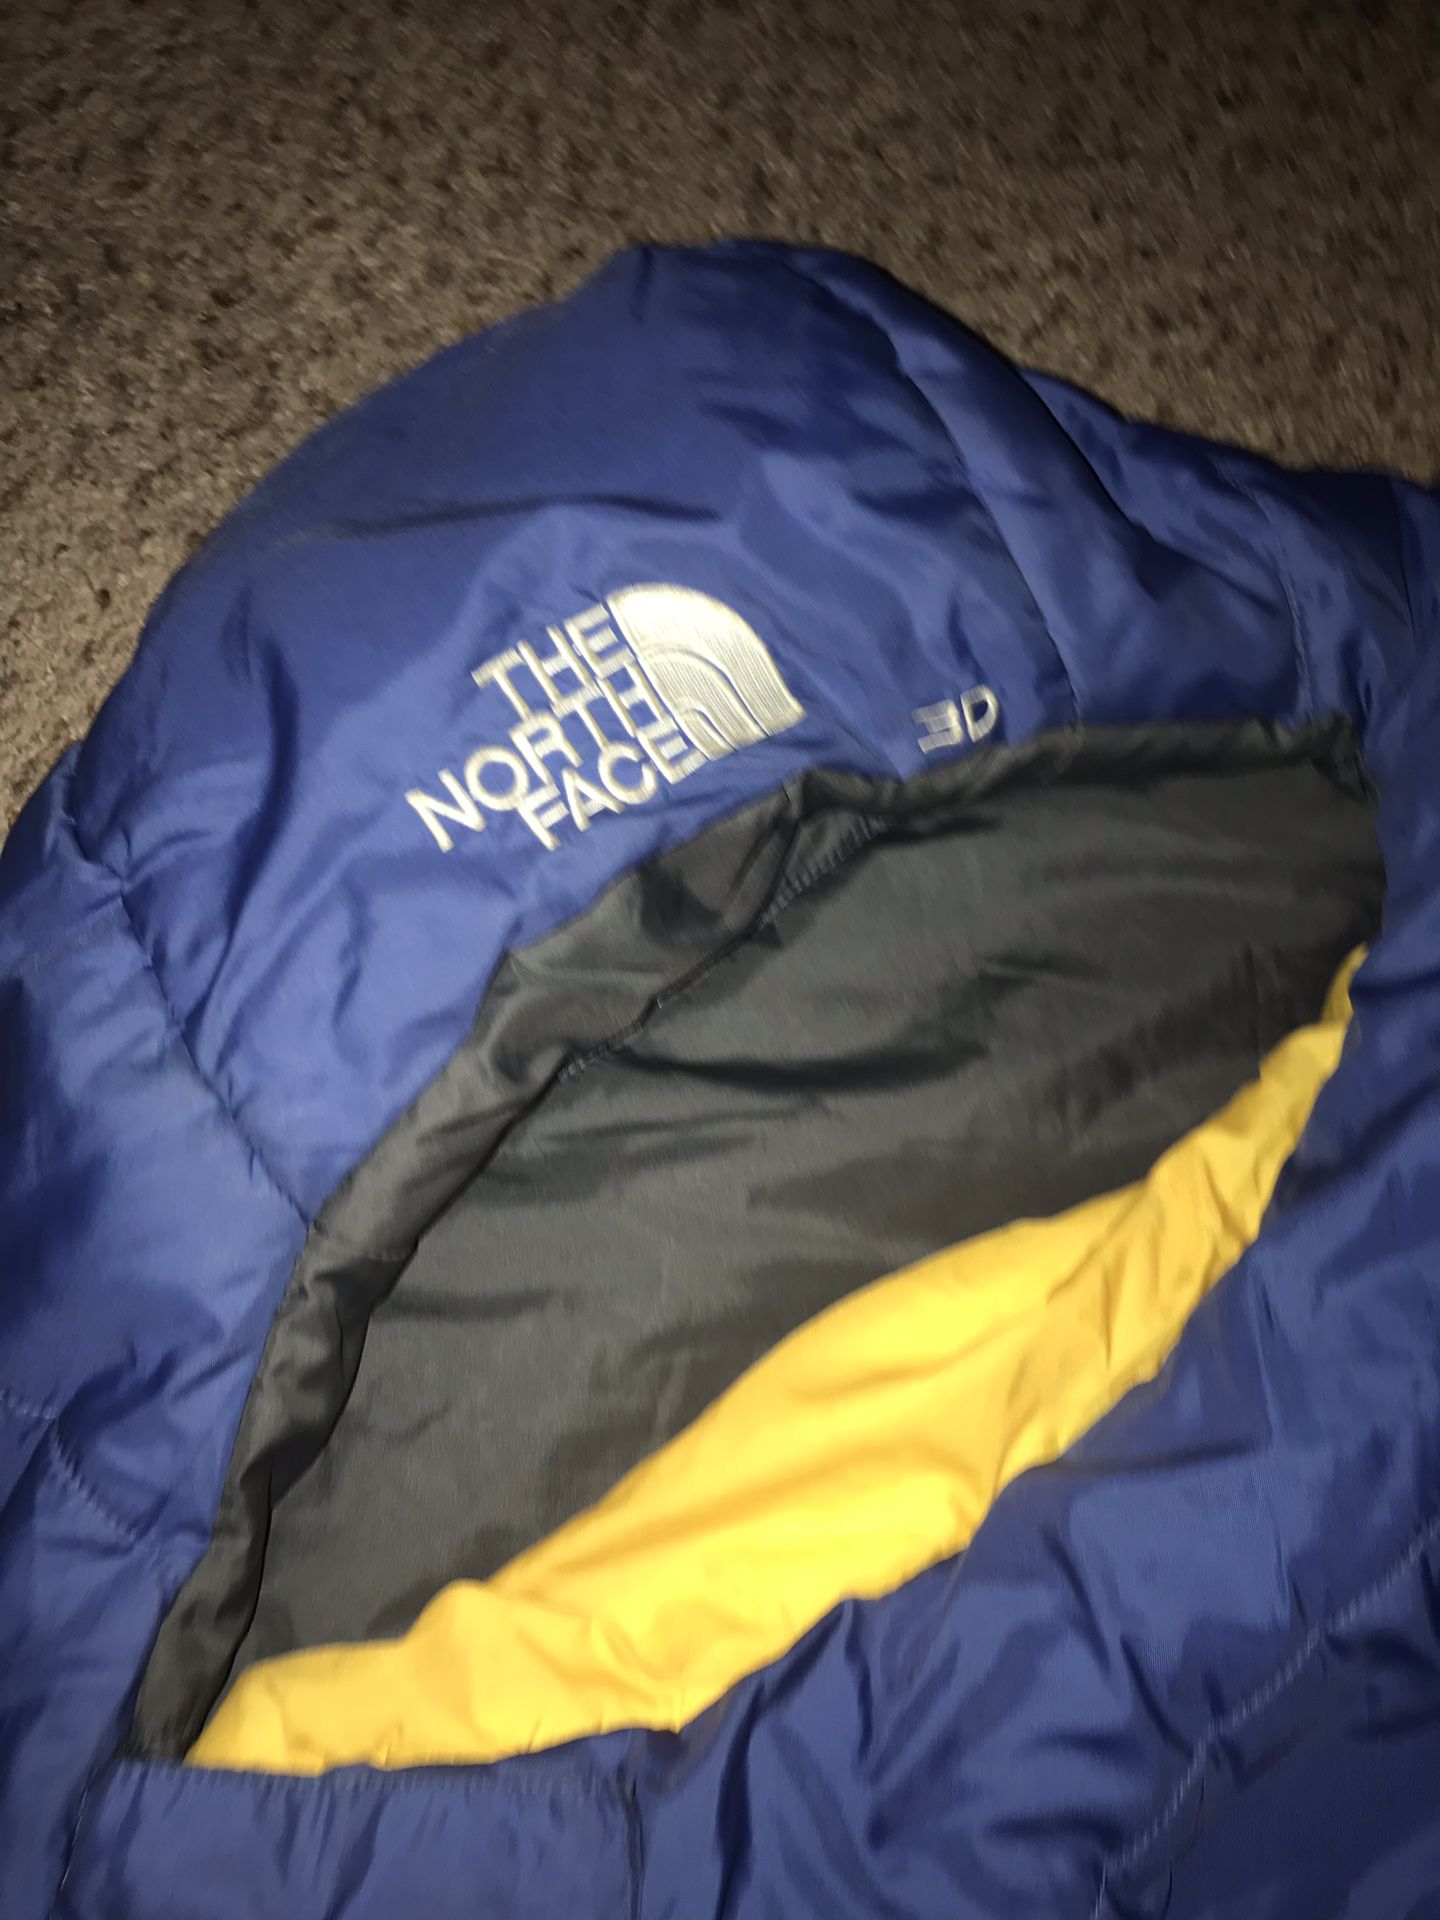 Kids 3D The North Face sleeping bag